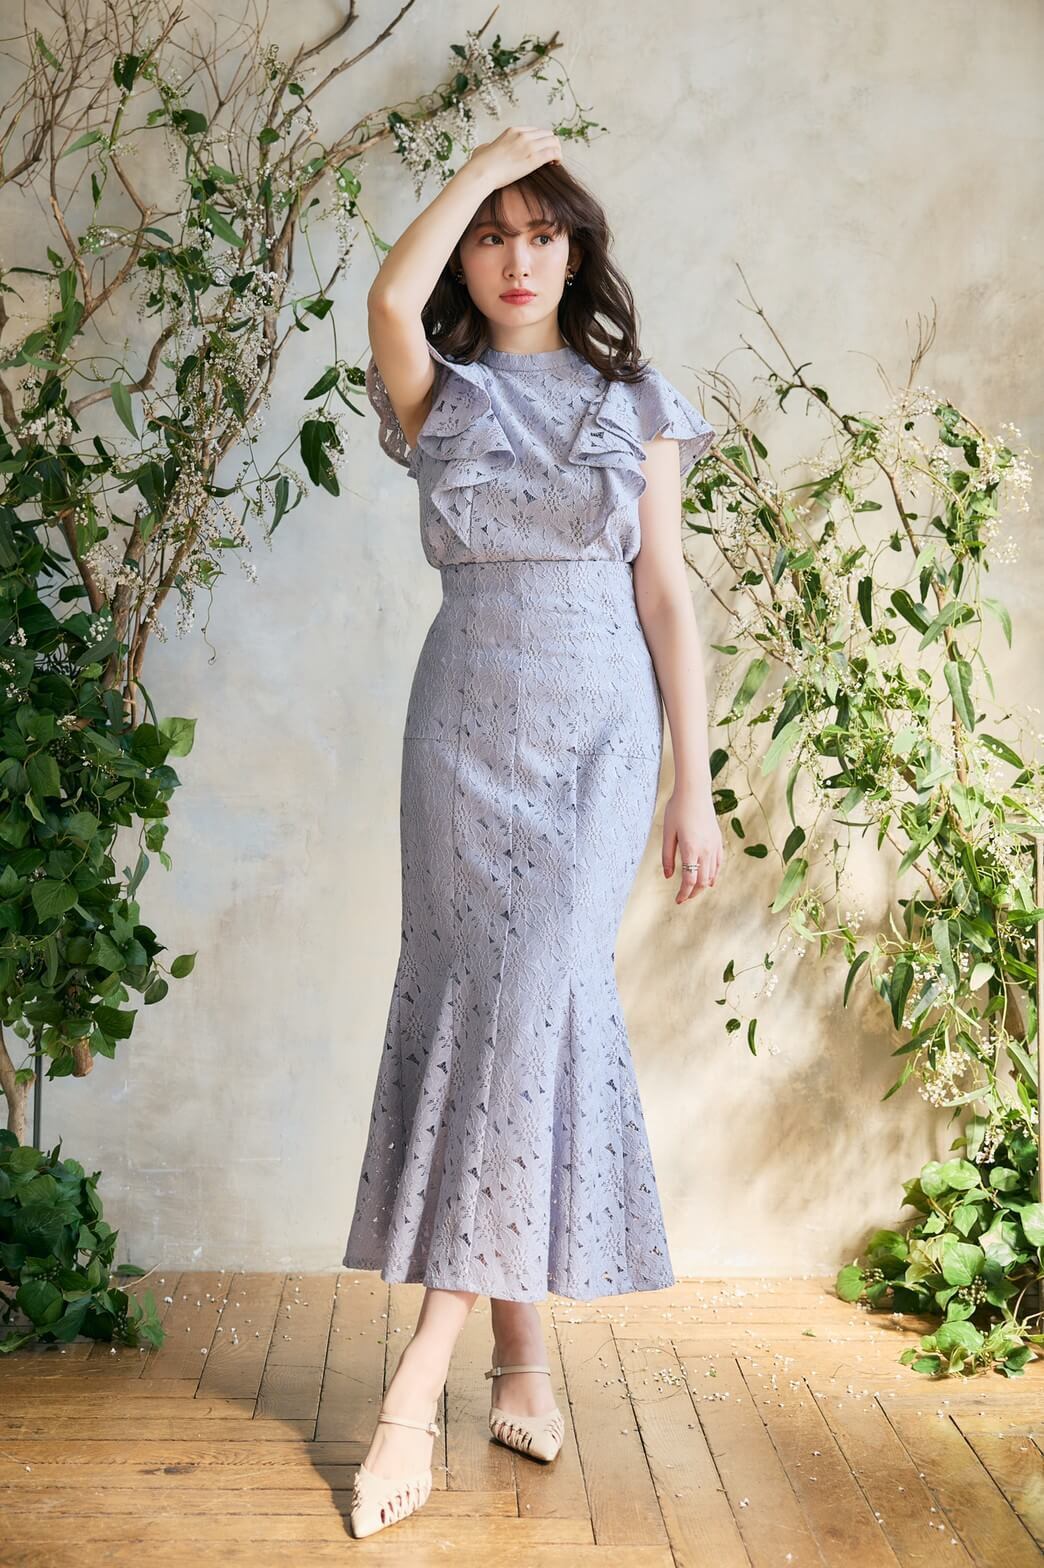 her lip to Floral Lace Mermaid Skirt 【M】ウエスト69cm - ロング